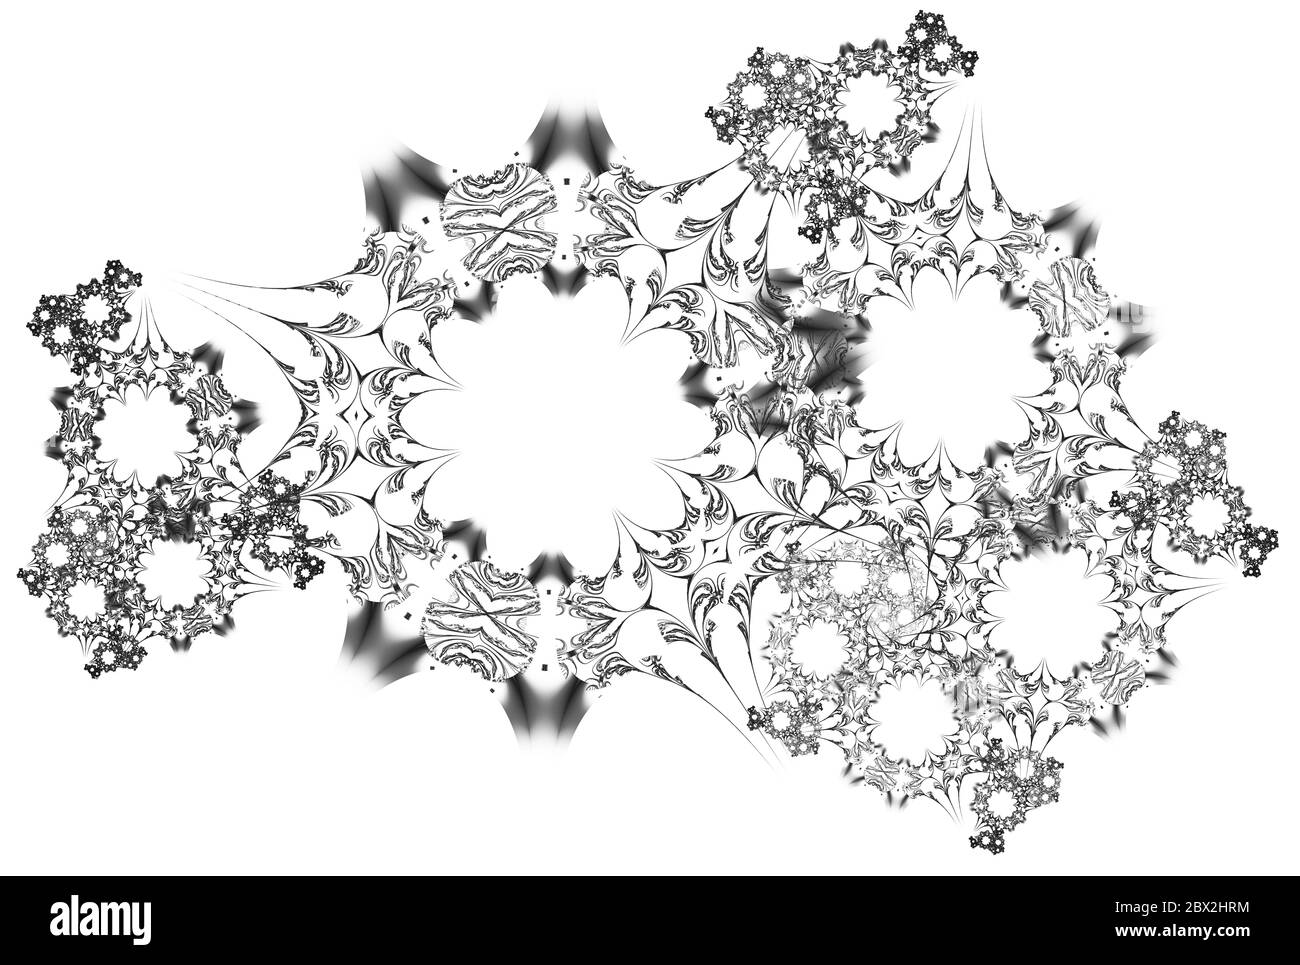 Monochrome abstract fractal illustration for creative design on white background Stock Photo